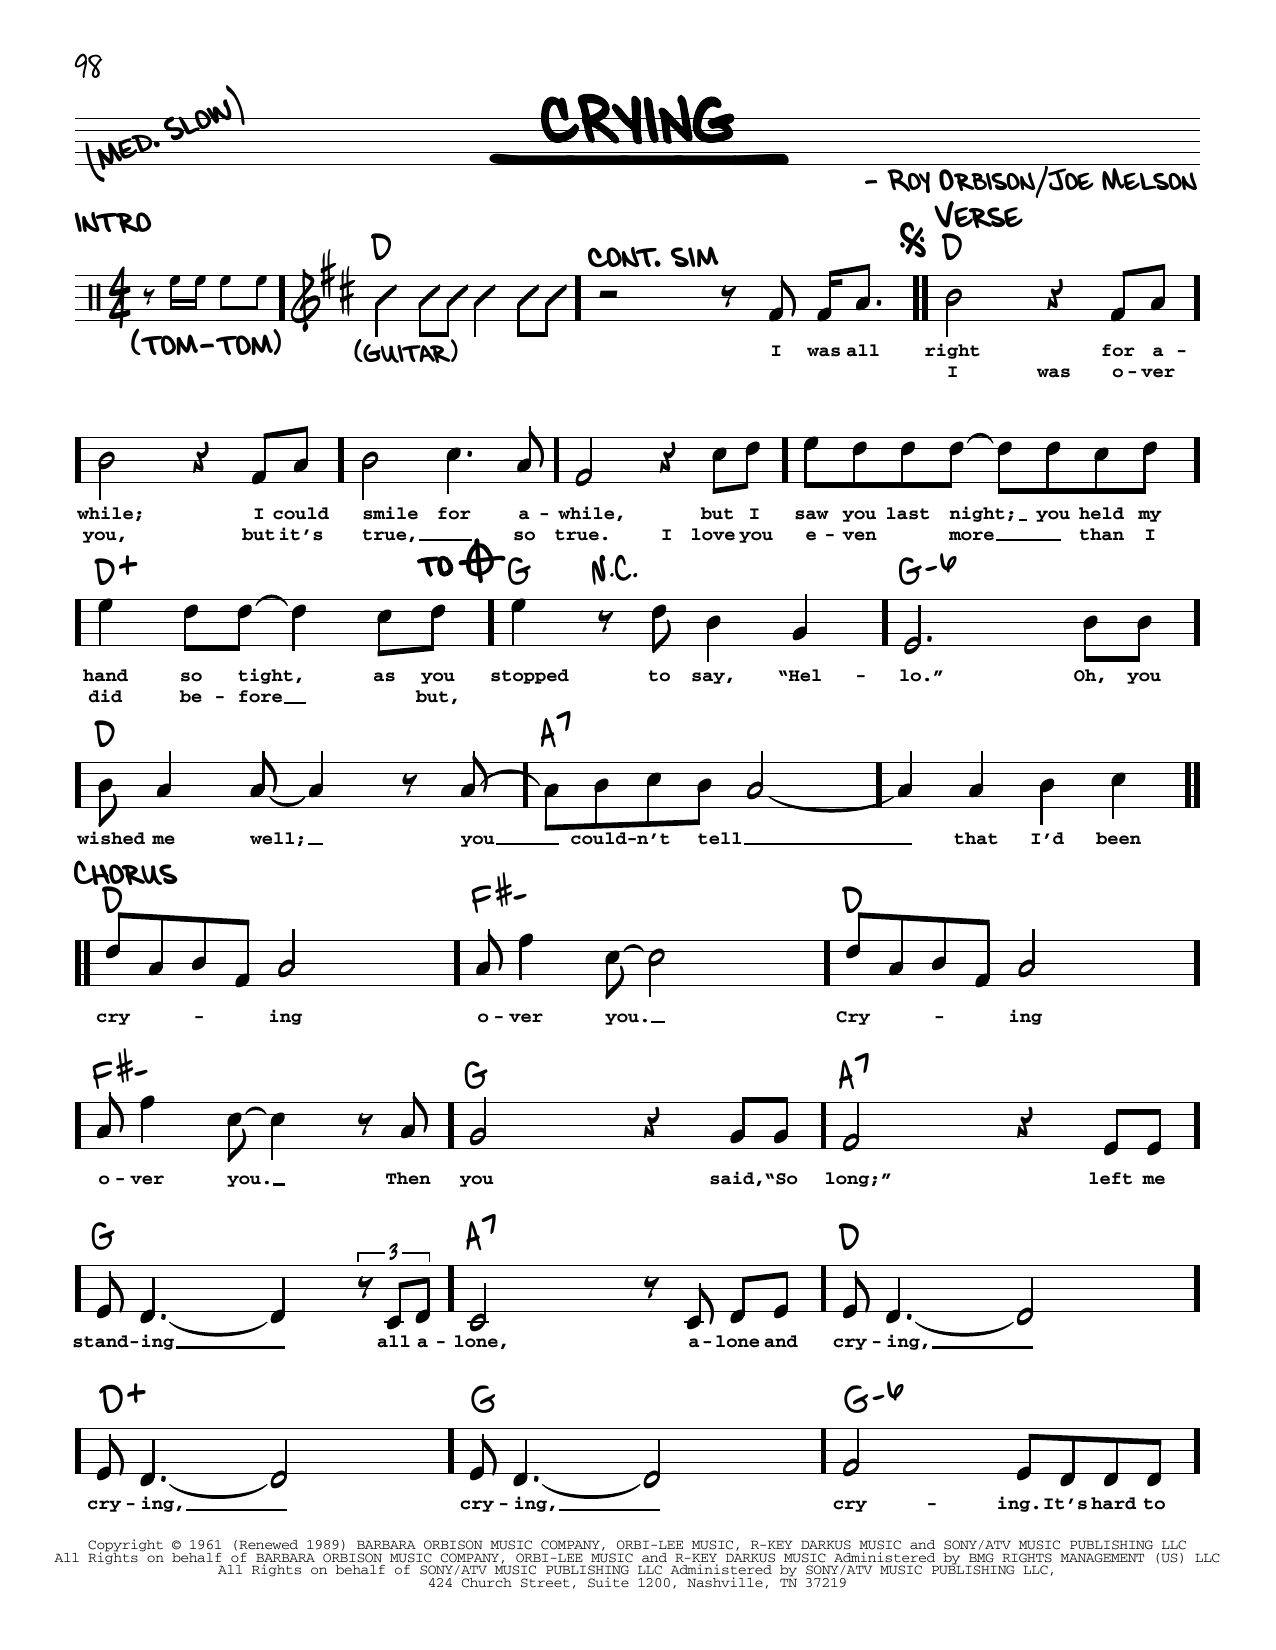 Download Roy Orbison Crying Sheet Music